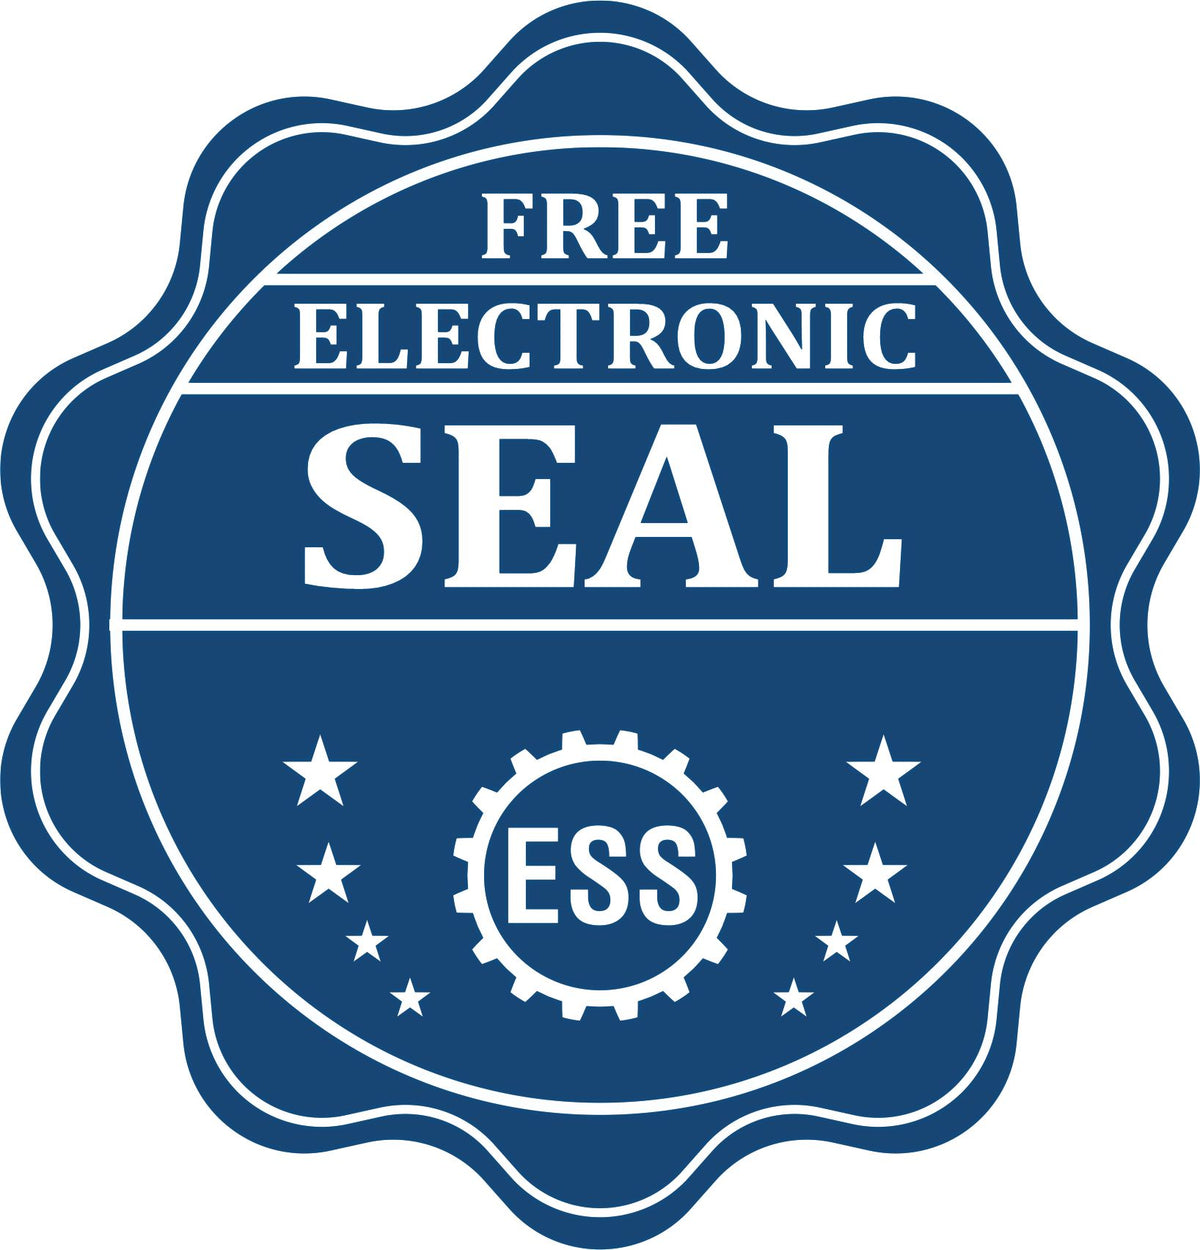 A badge showing a free electronic seal for the Premium MaxLight Pre-Inked Nebraska Engineering Stamp with stars and the ESS gear on the emblem.